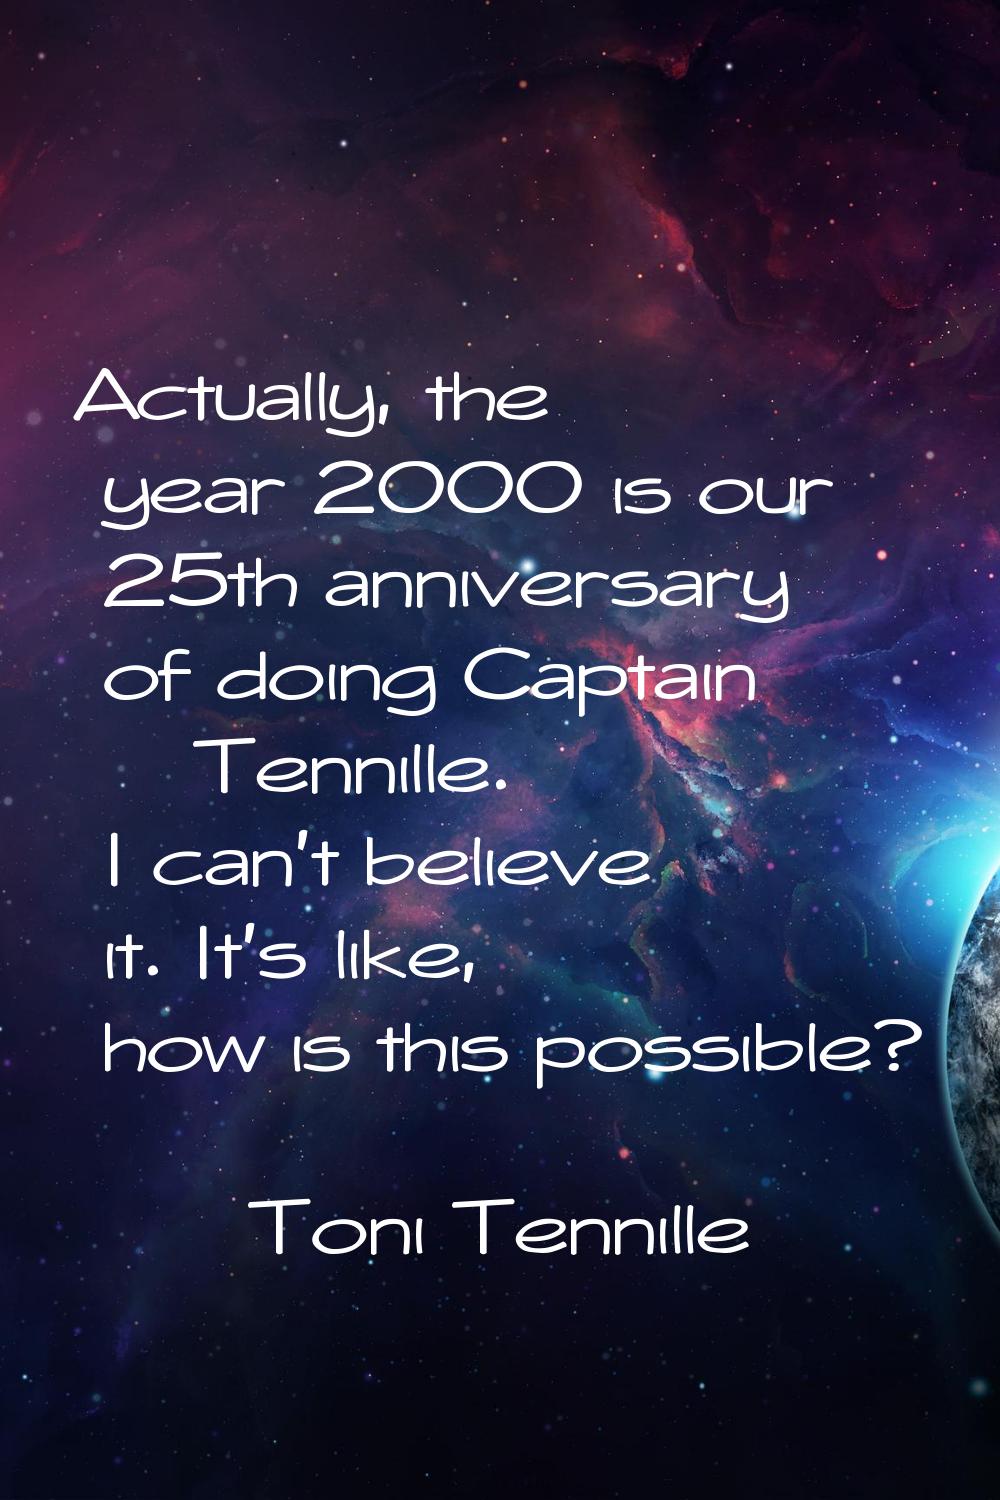 Actually, the year 2000 is our 25th anniversary of doing Captain & Tennille. I can't believe it. It